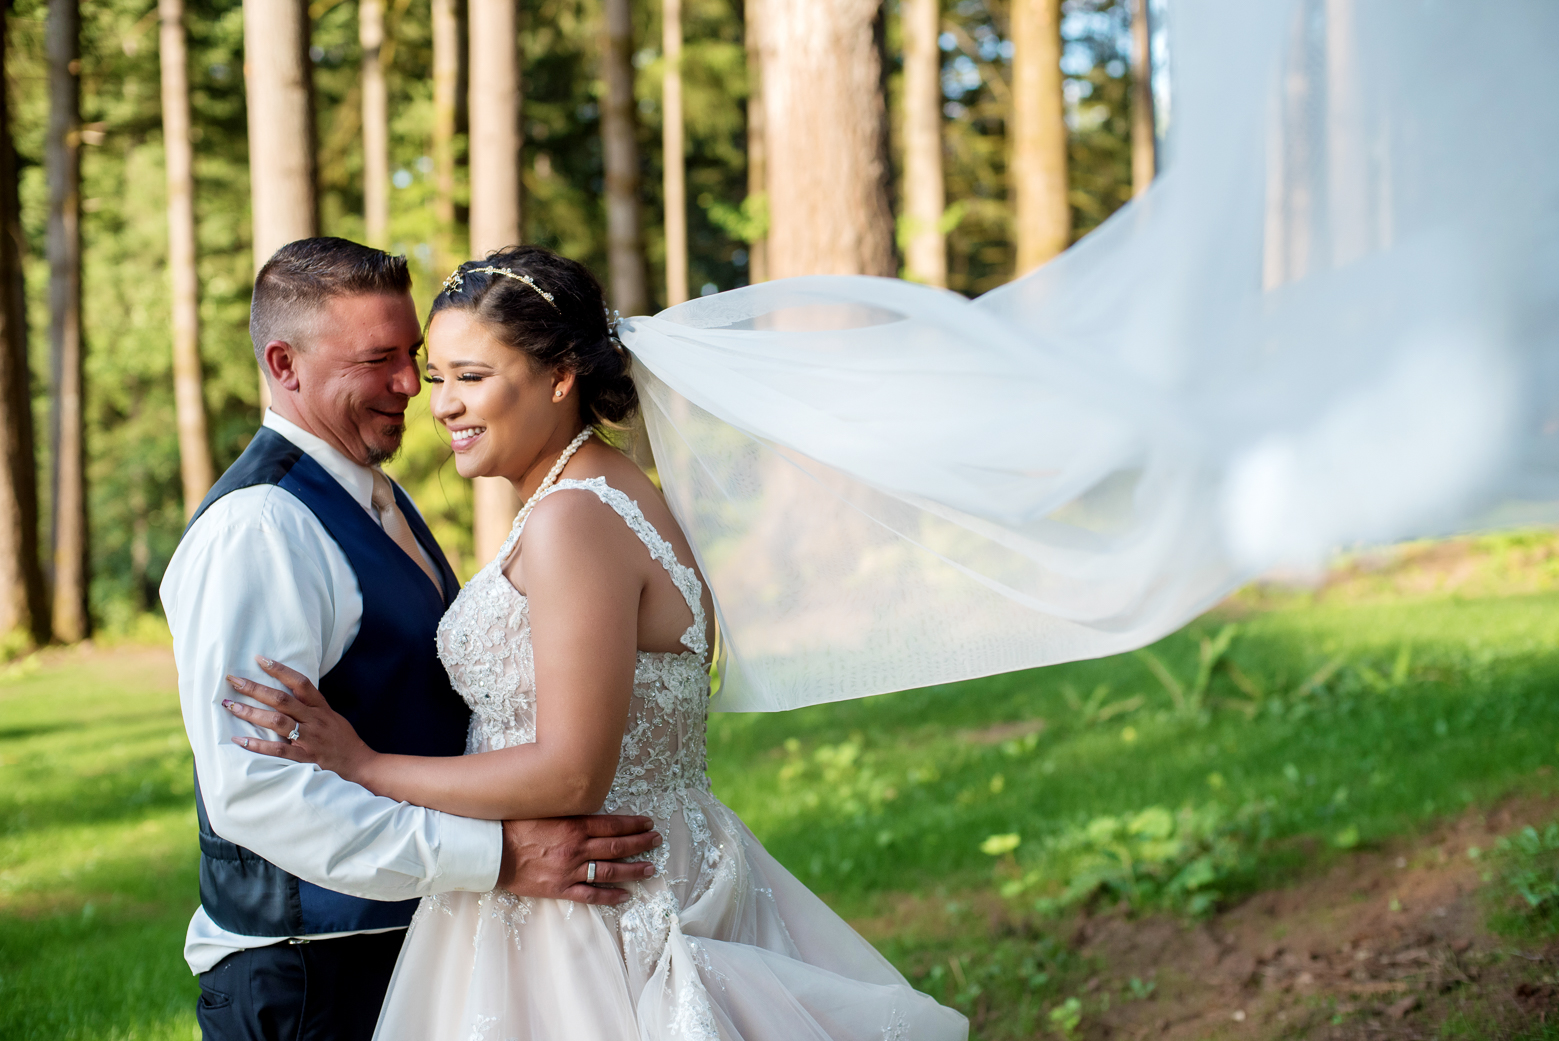 bride and groom laugh as brides veil blows in the wind